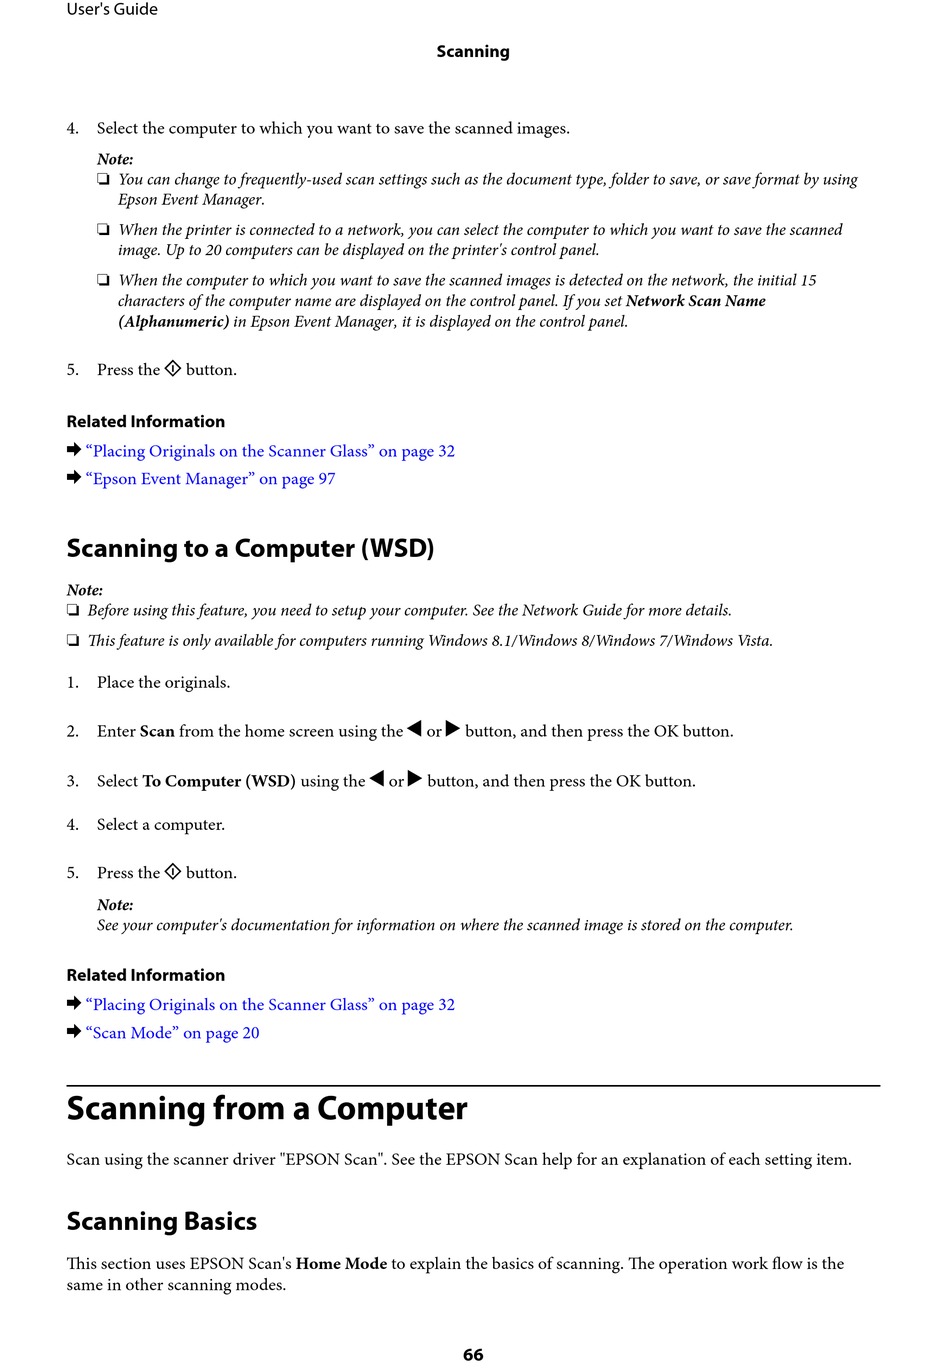 Wsd Scanning To Scanning To A Computer (Wsd); Scanning From A Computer; Scanning Basics - Epson Printer User Manual [Page 66] | ManualsLib